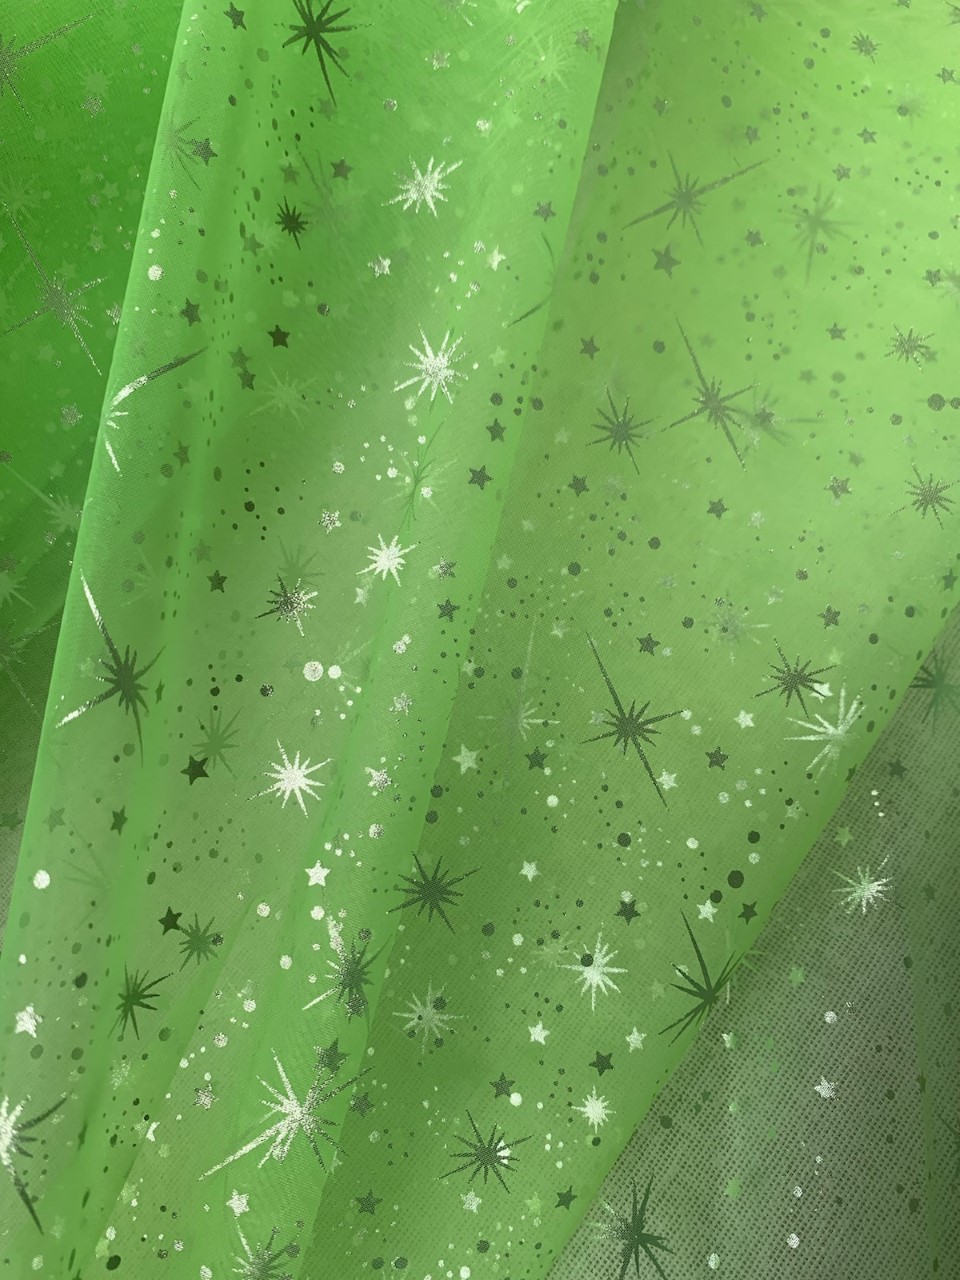 58/60 Lime Foil Star Organza Fabric - By The Yard